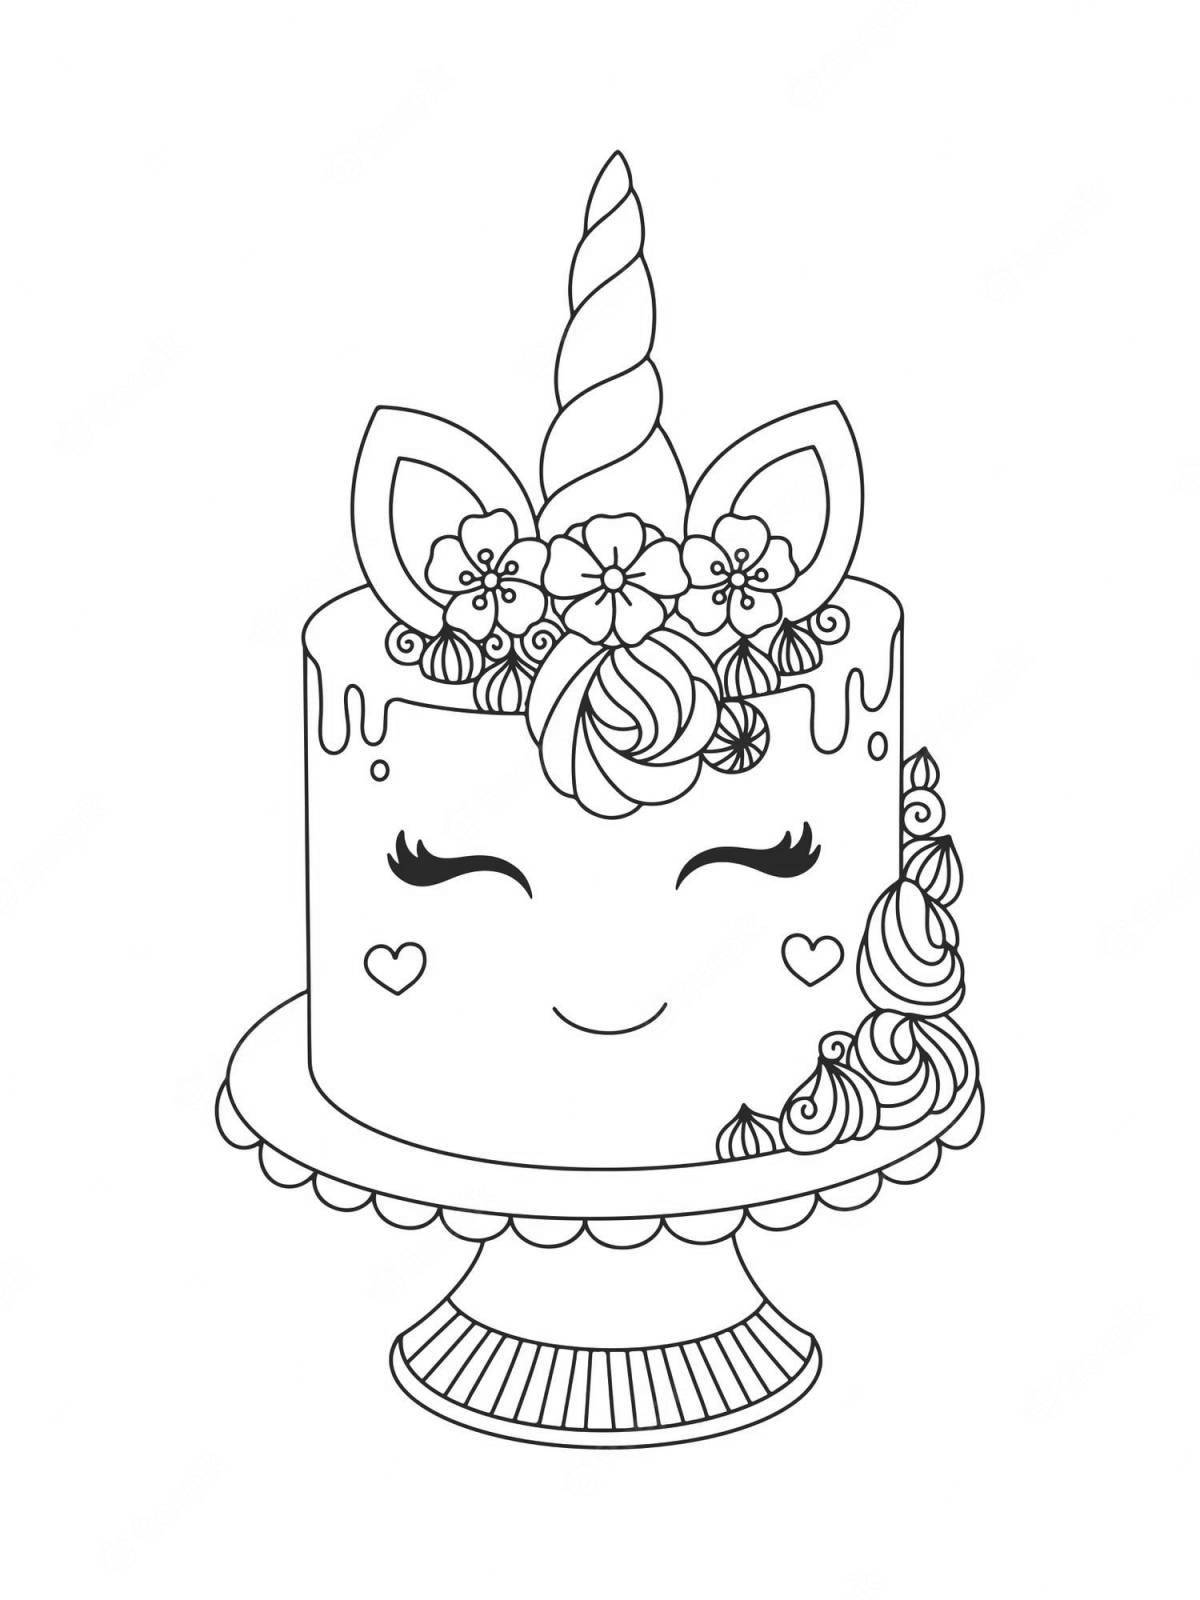 Exquisite cake coloring pages for girls